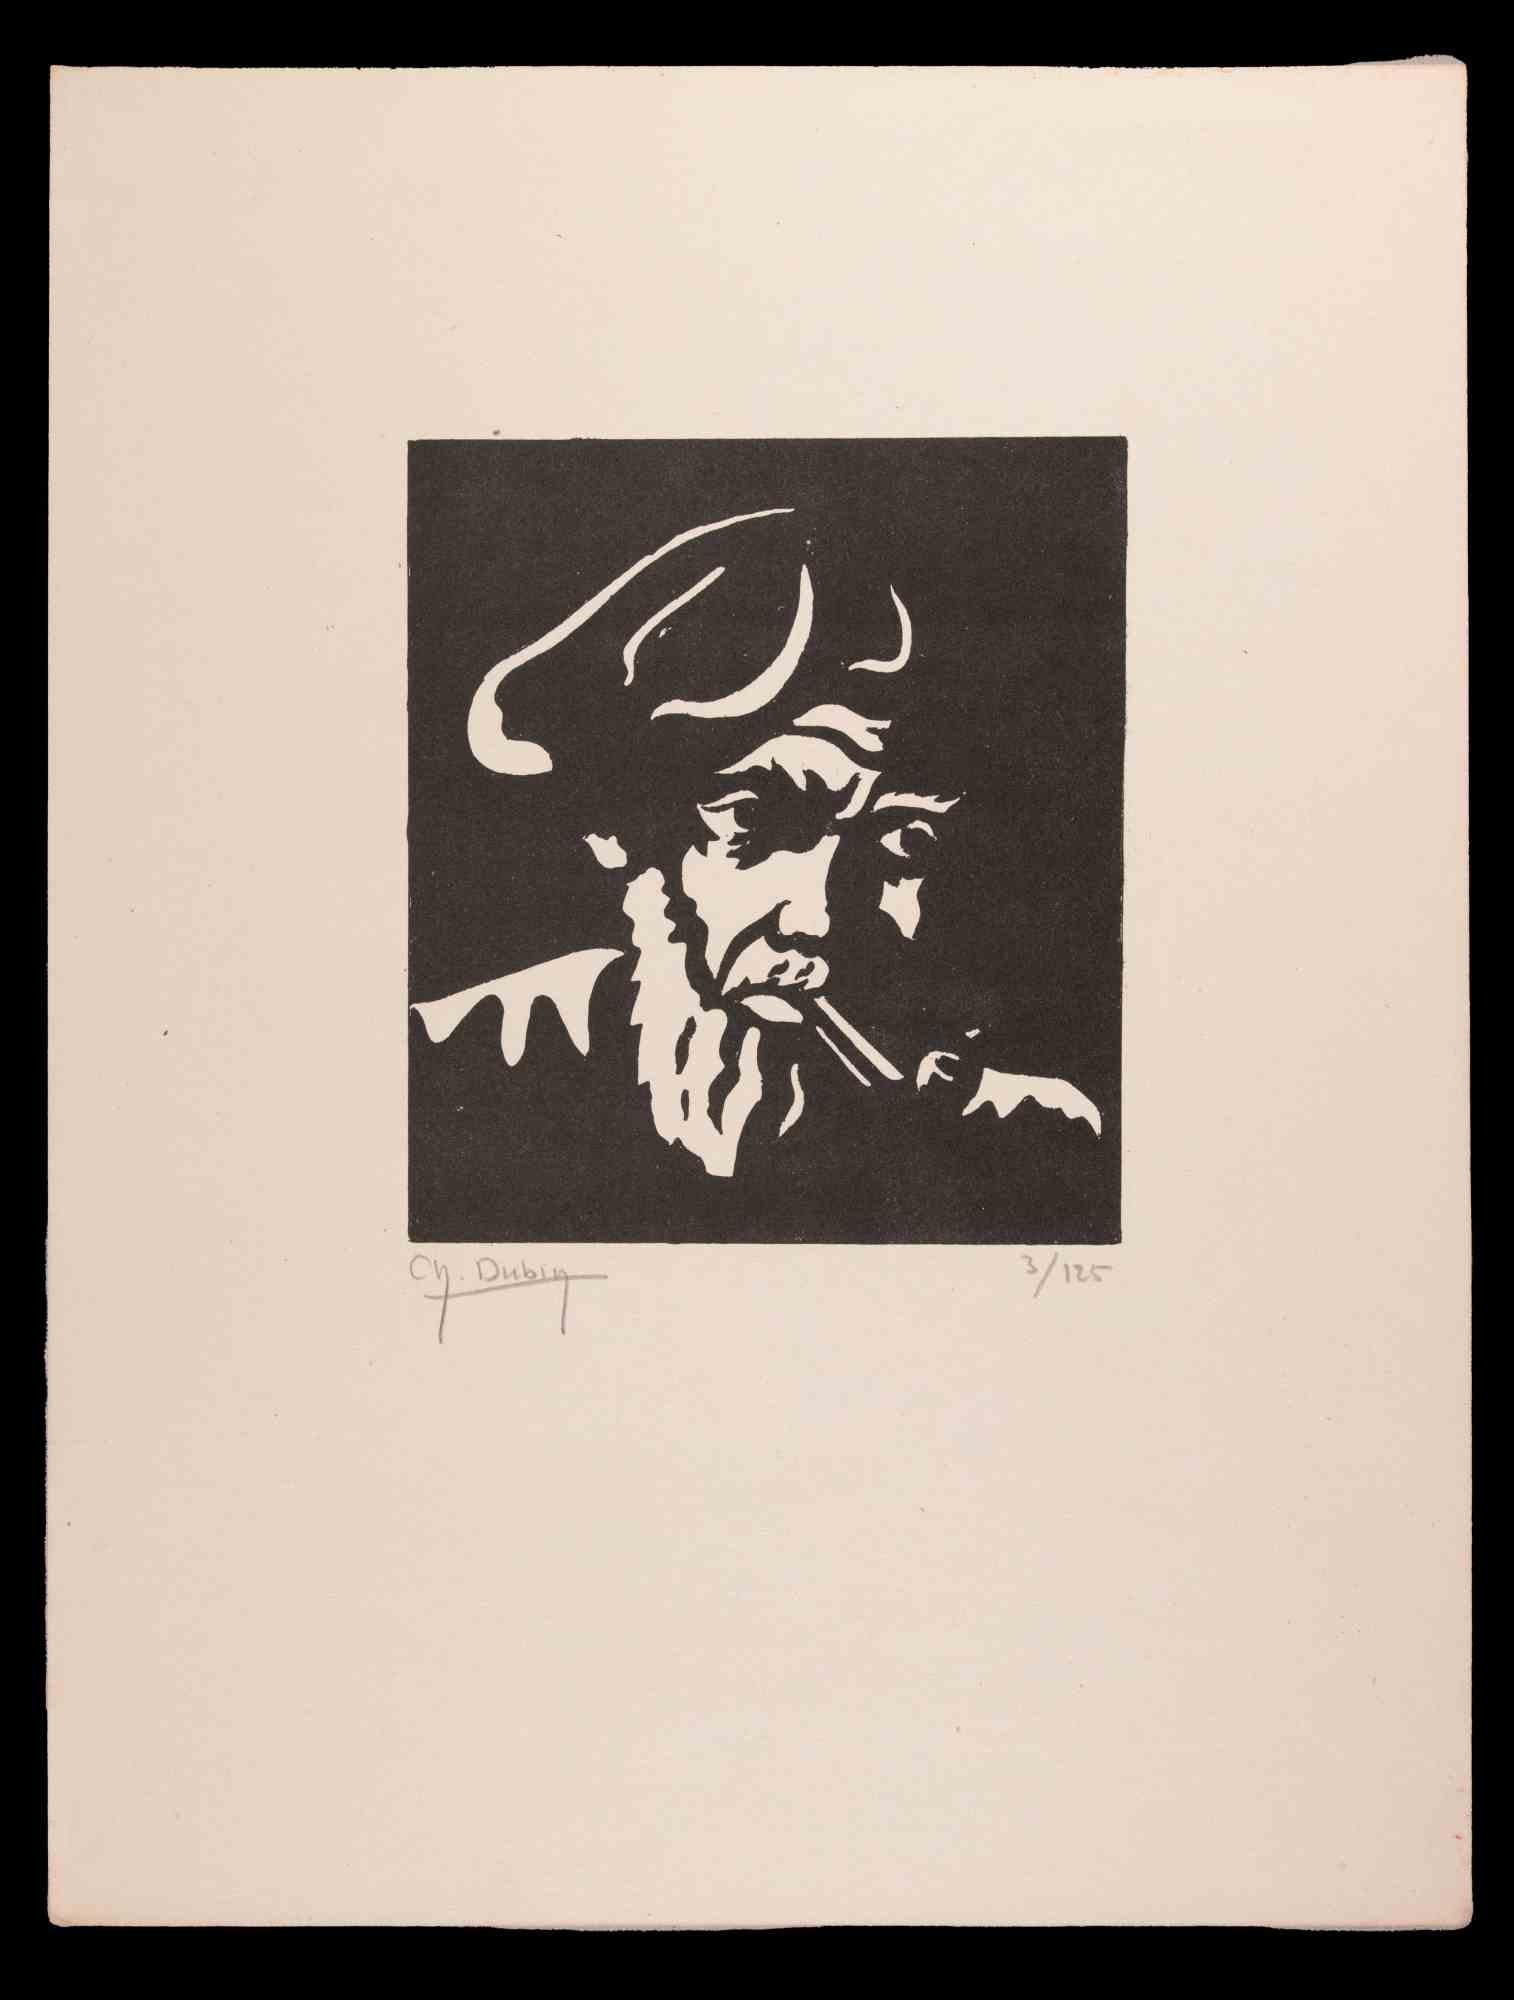 The Smoker - Woodcut realized by Charles Dubin - Early 20th Century